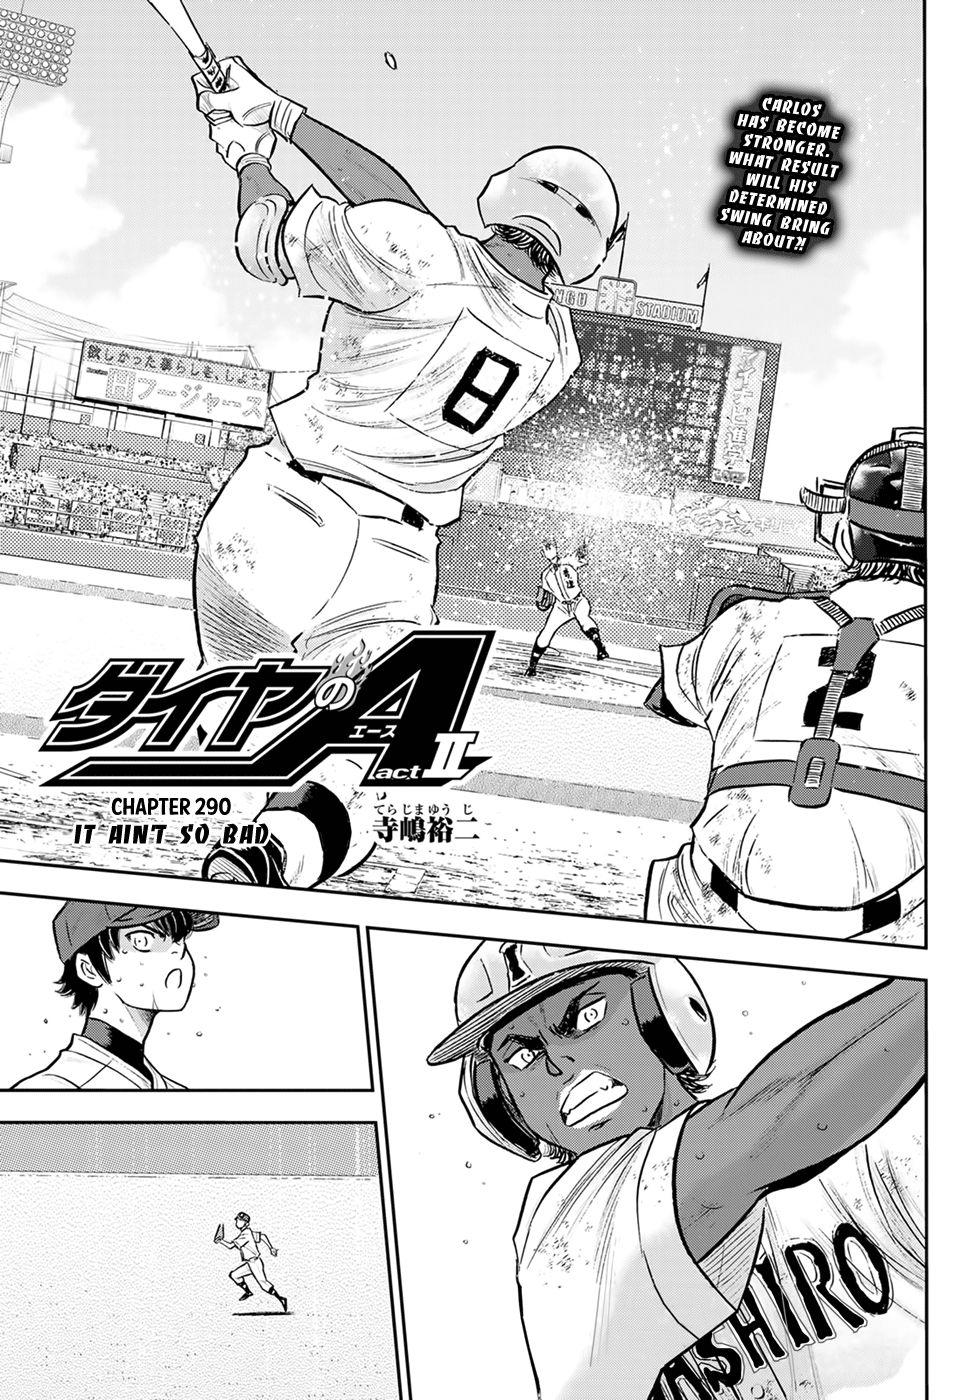 Diamond No Ace Act II - Chapter 283 in english